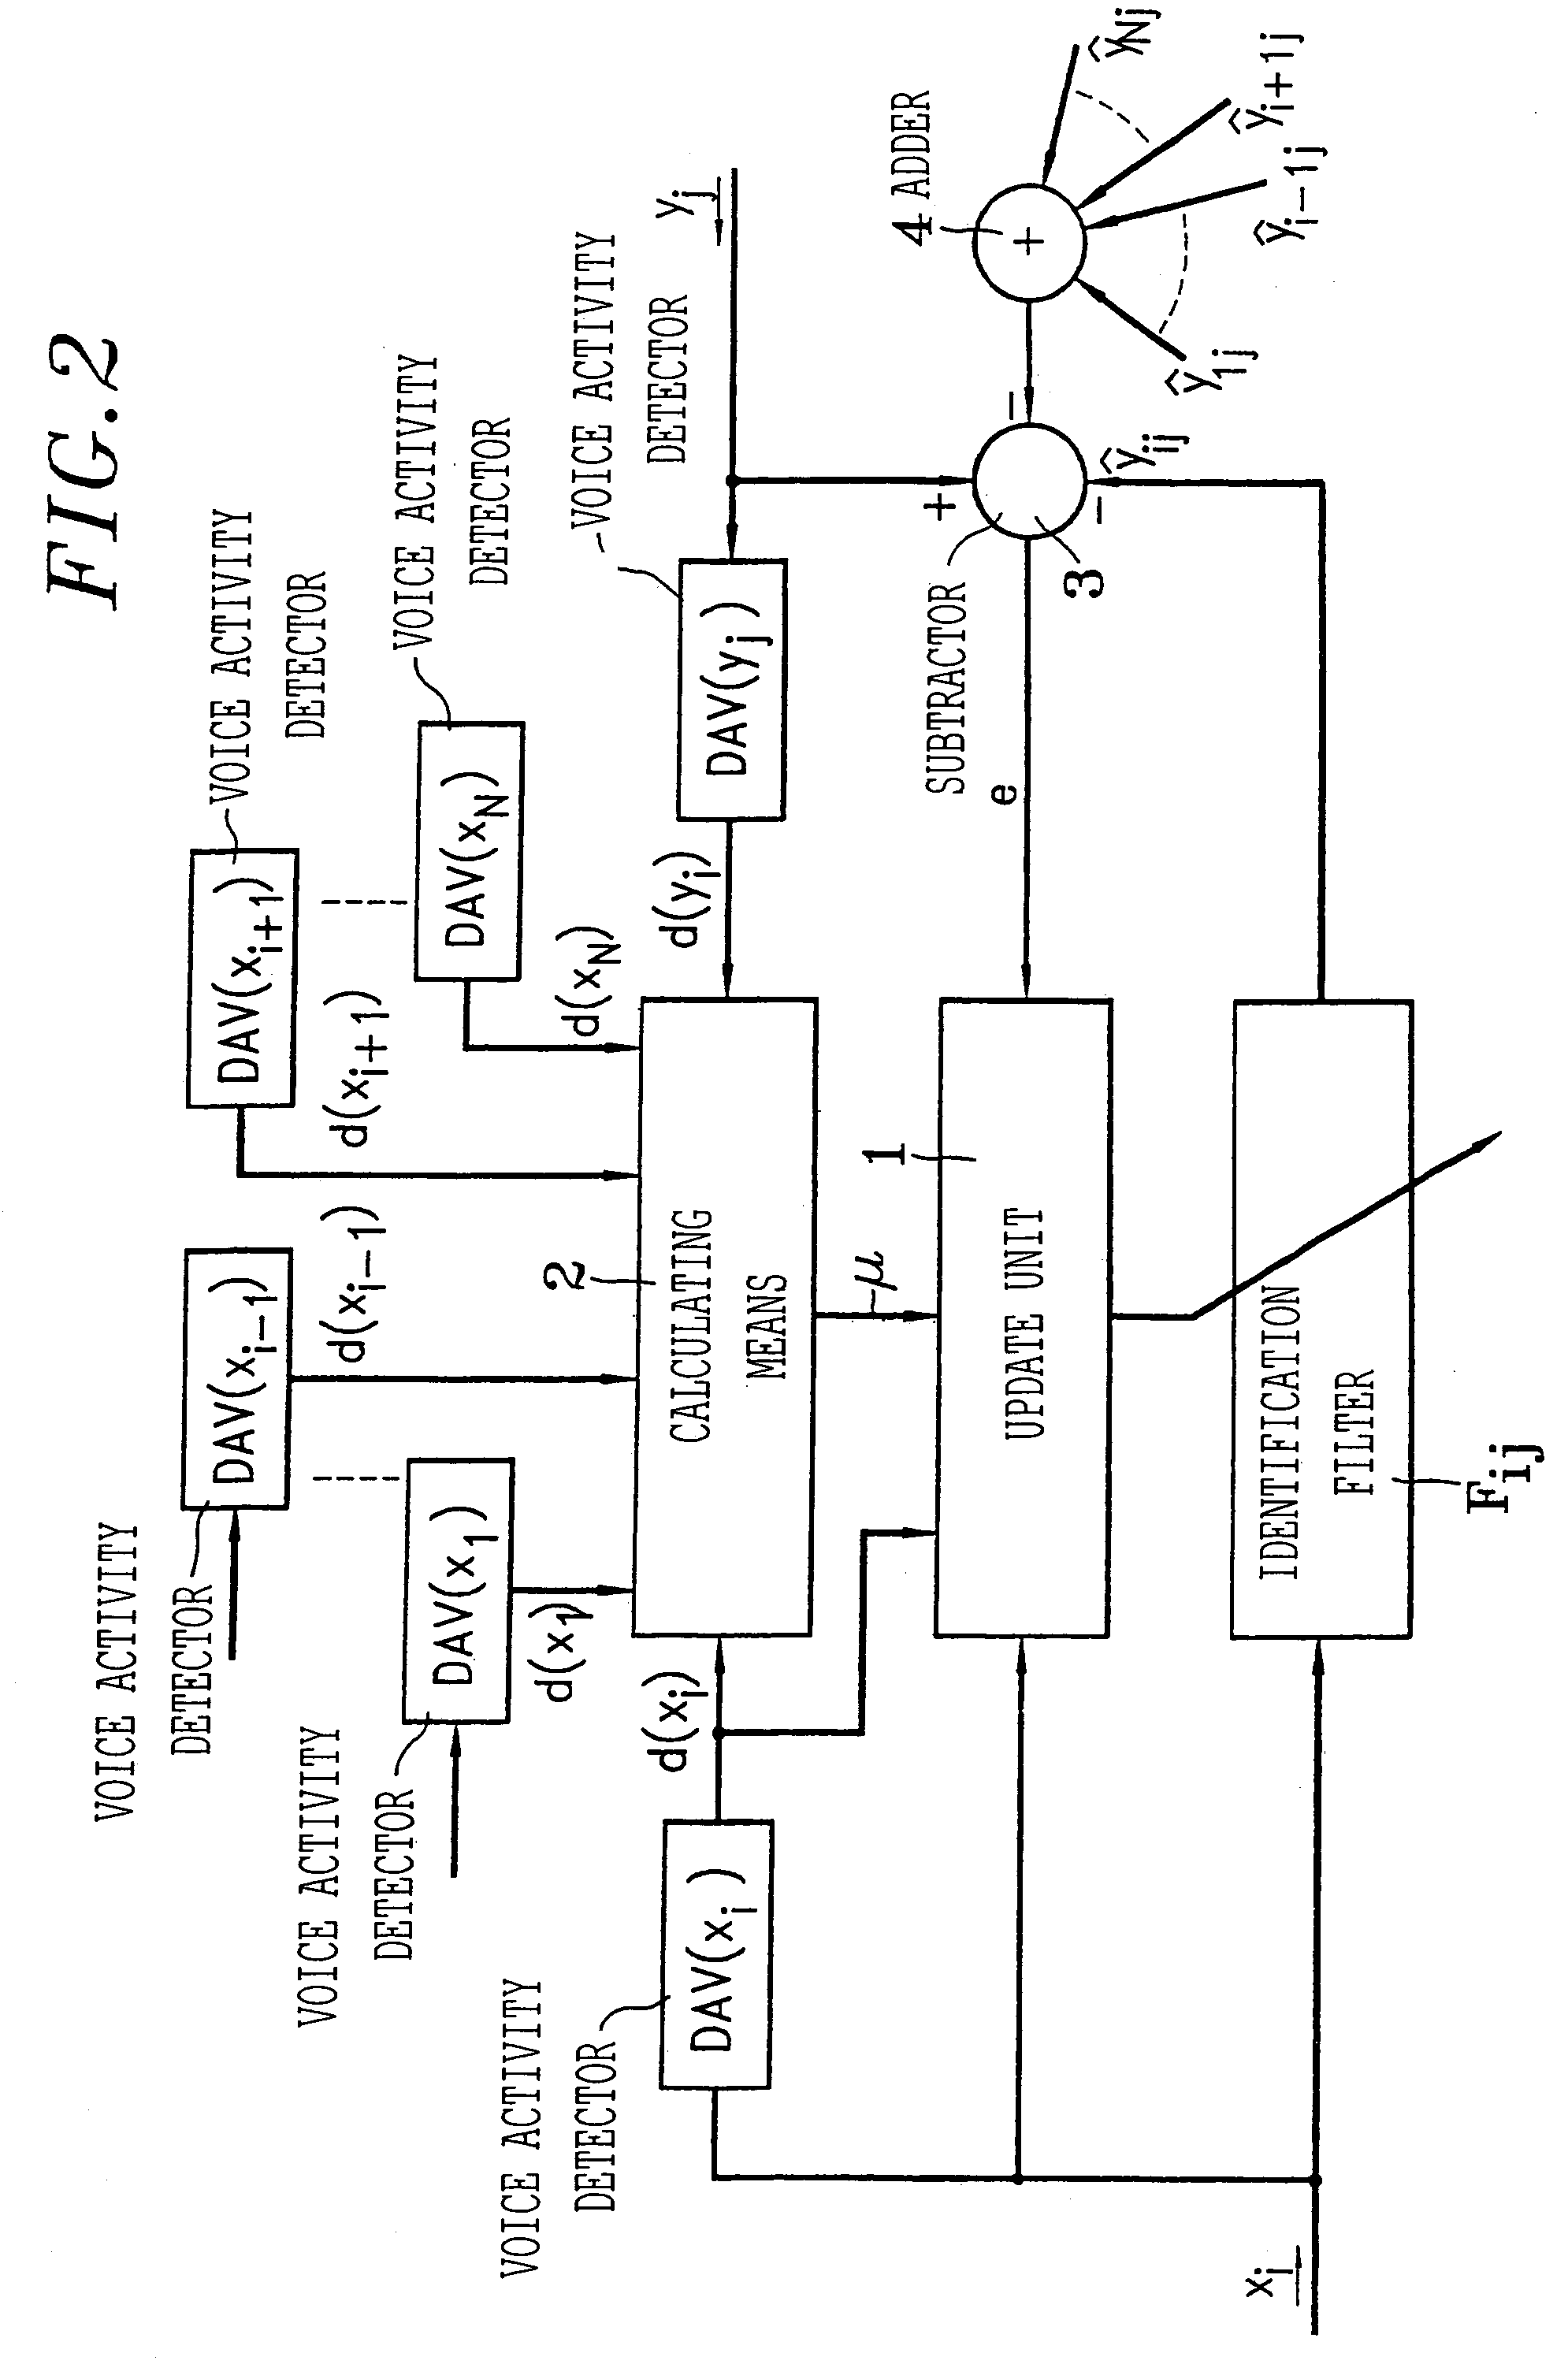 Method for adaptive control of multichannel acoustic echo cancellation system and device therefor